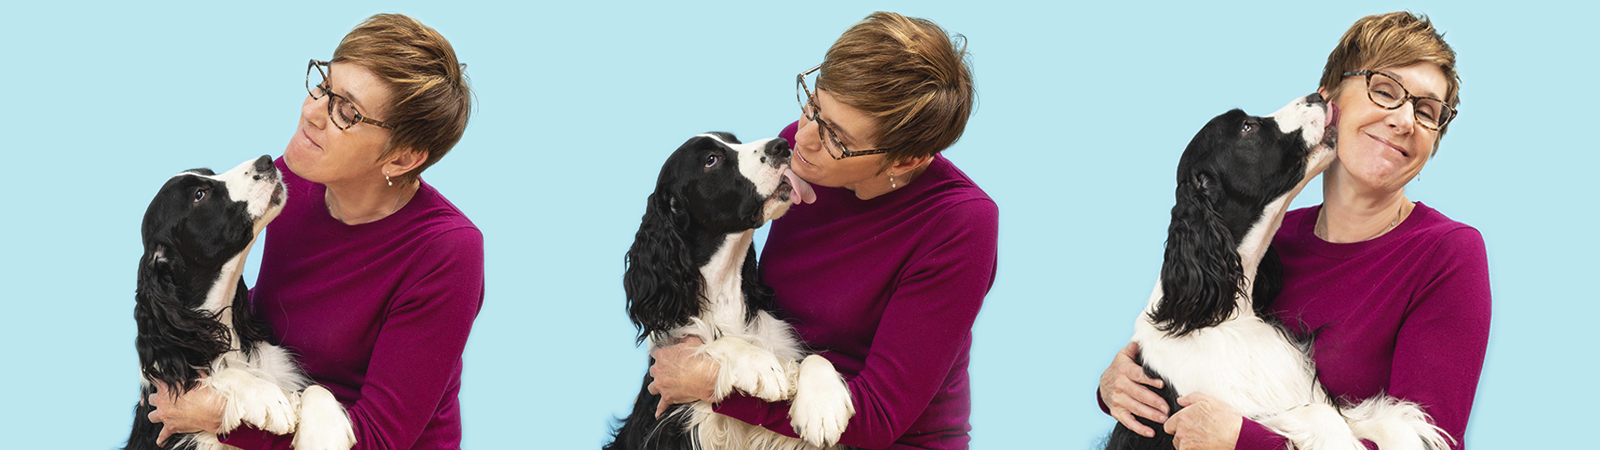 Dr. Sharon Hubby and faithful companion showing affection